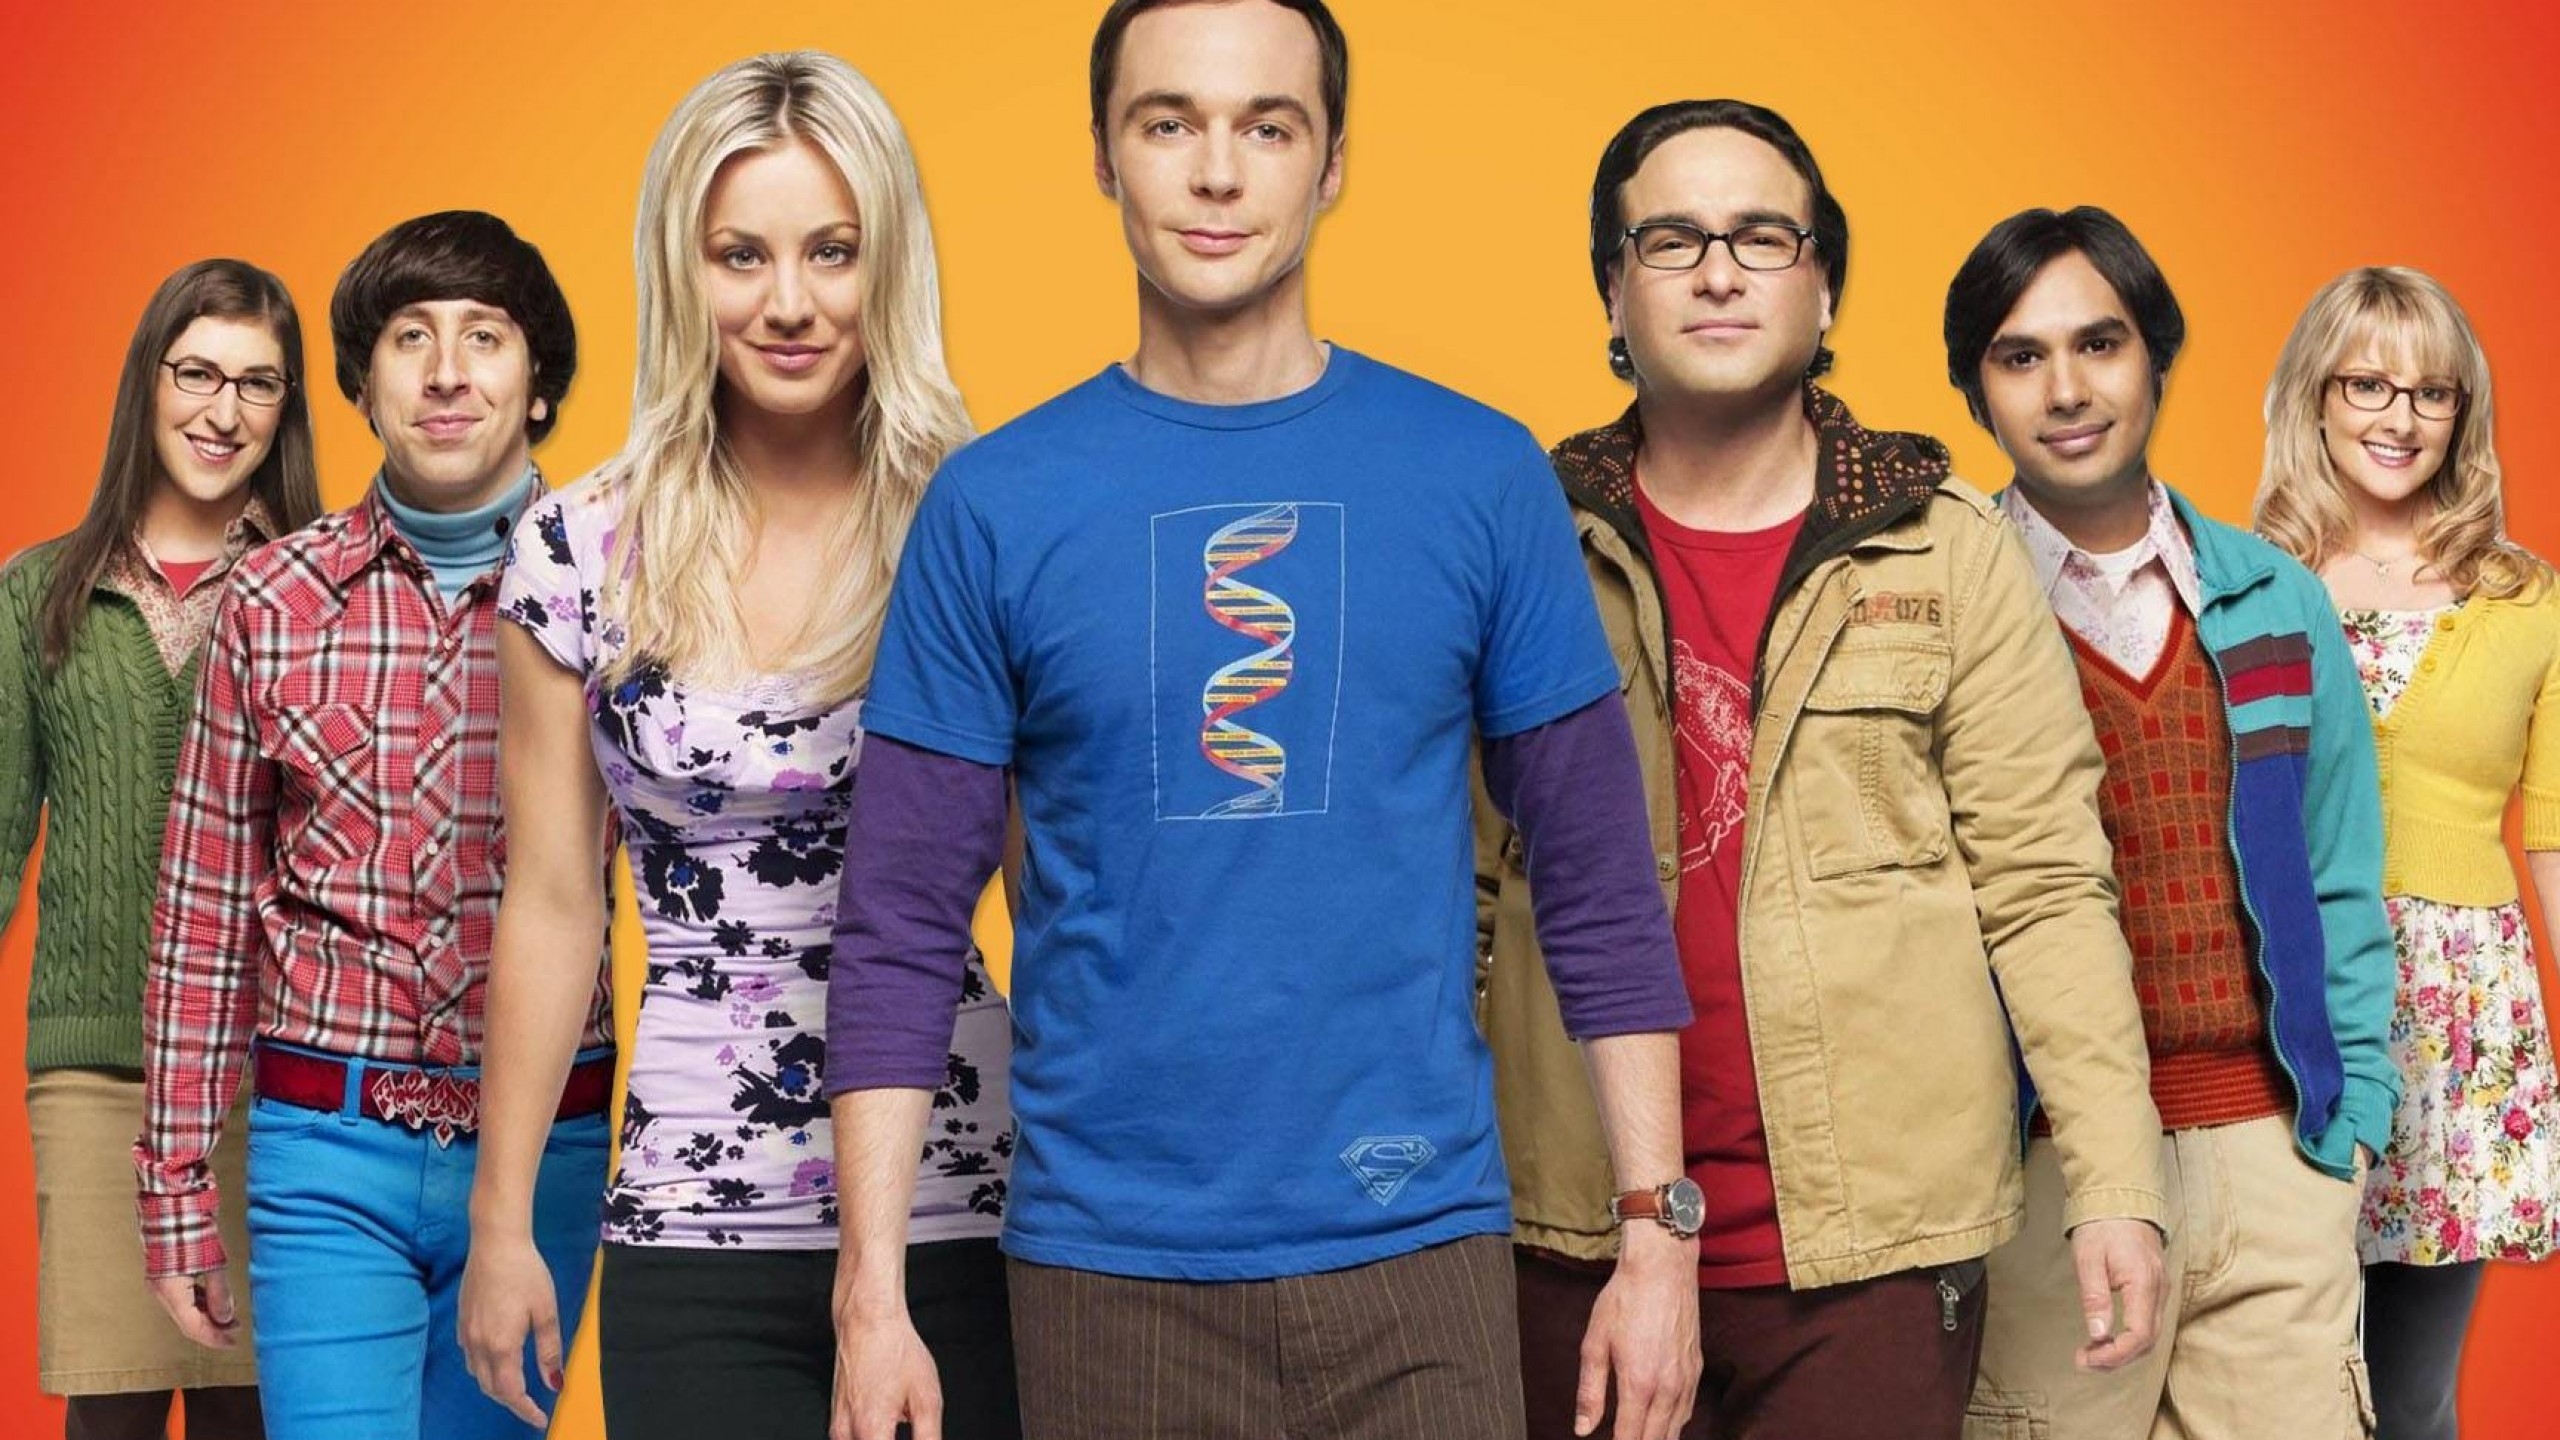 The Big Bang Theory Smiley Cast for 2560x1440 HDTV resolution